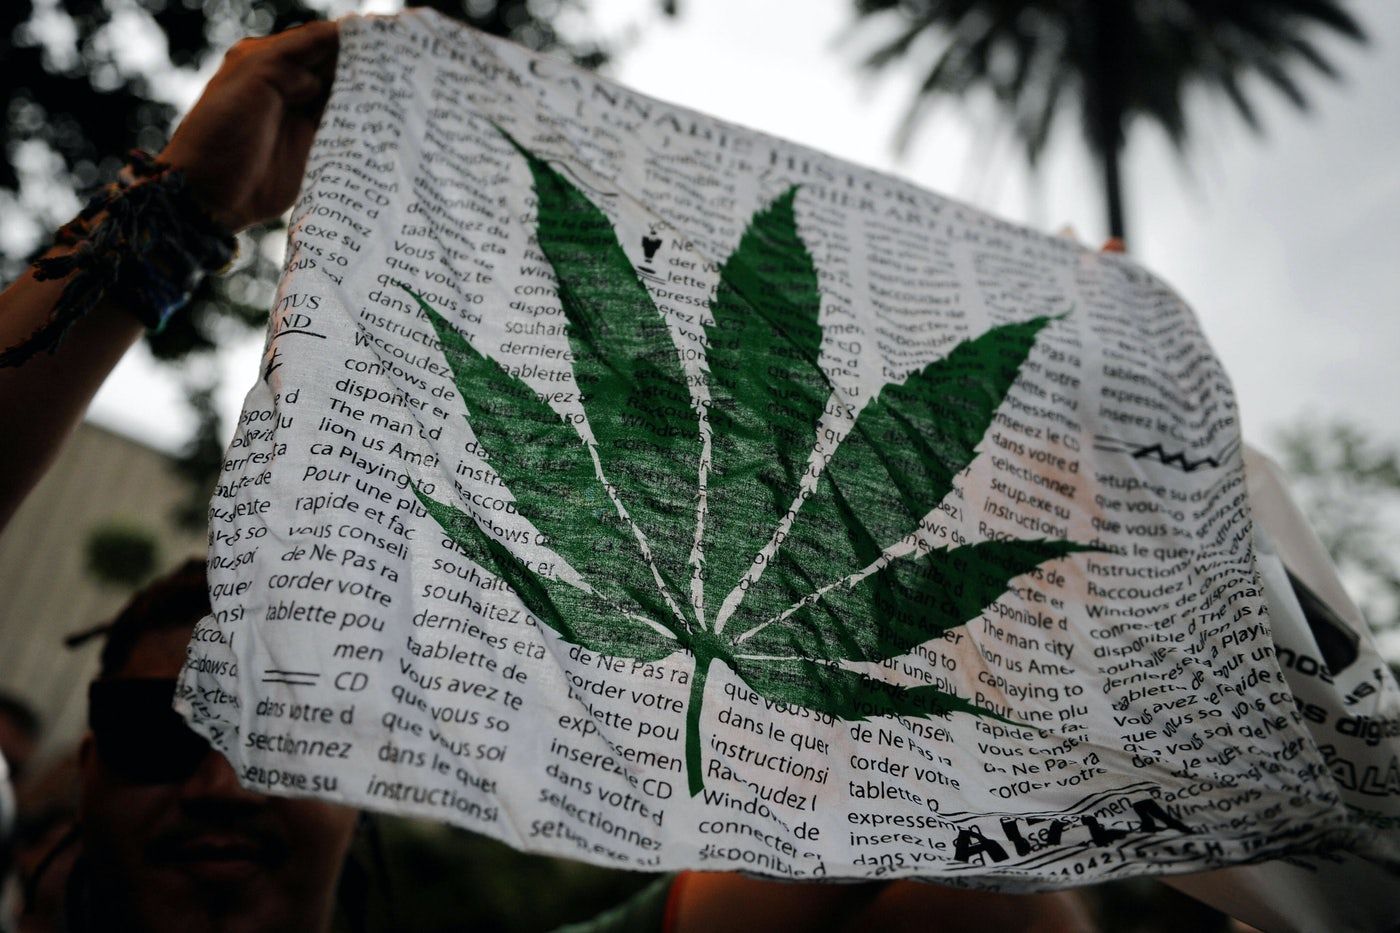 Flag Held with Cannabis Leaf During Legal Cannabis Protest